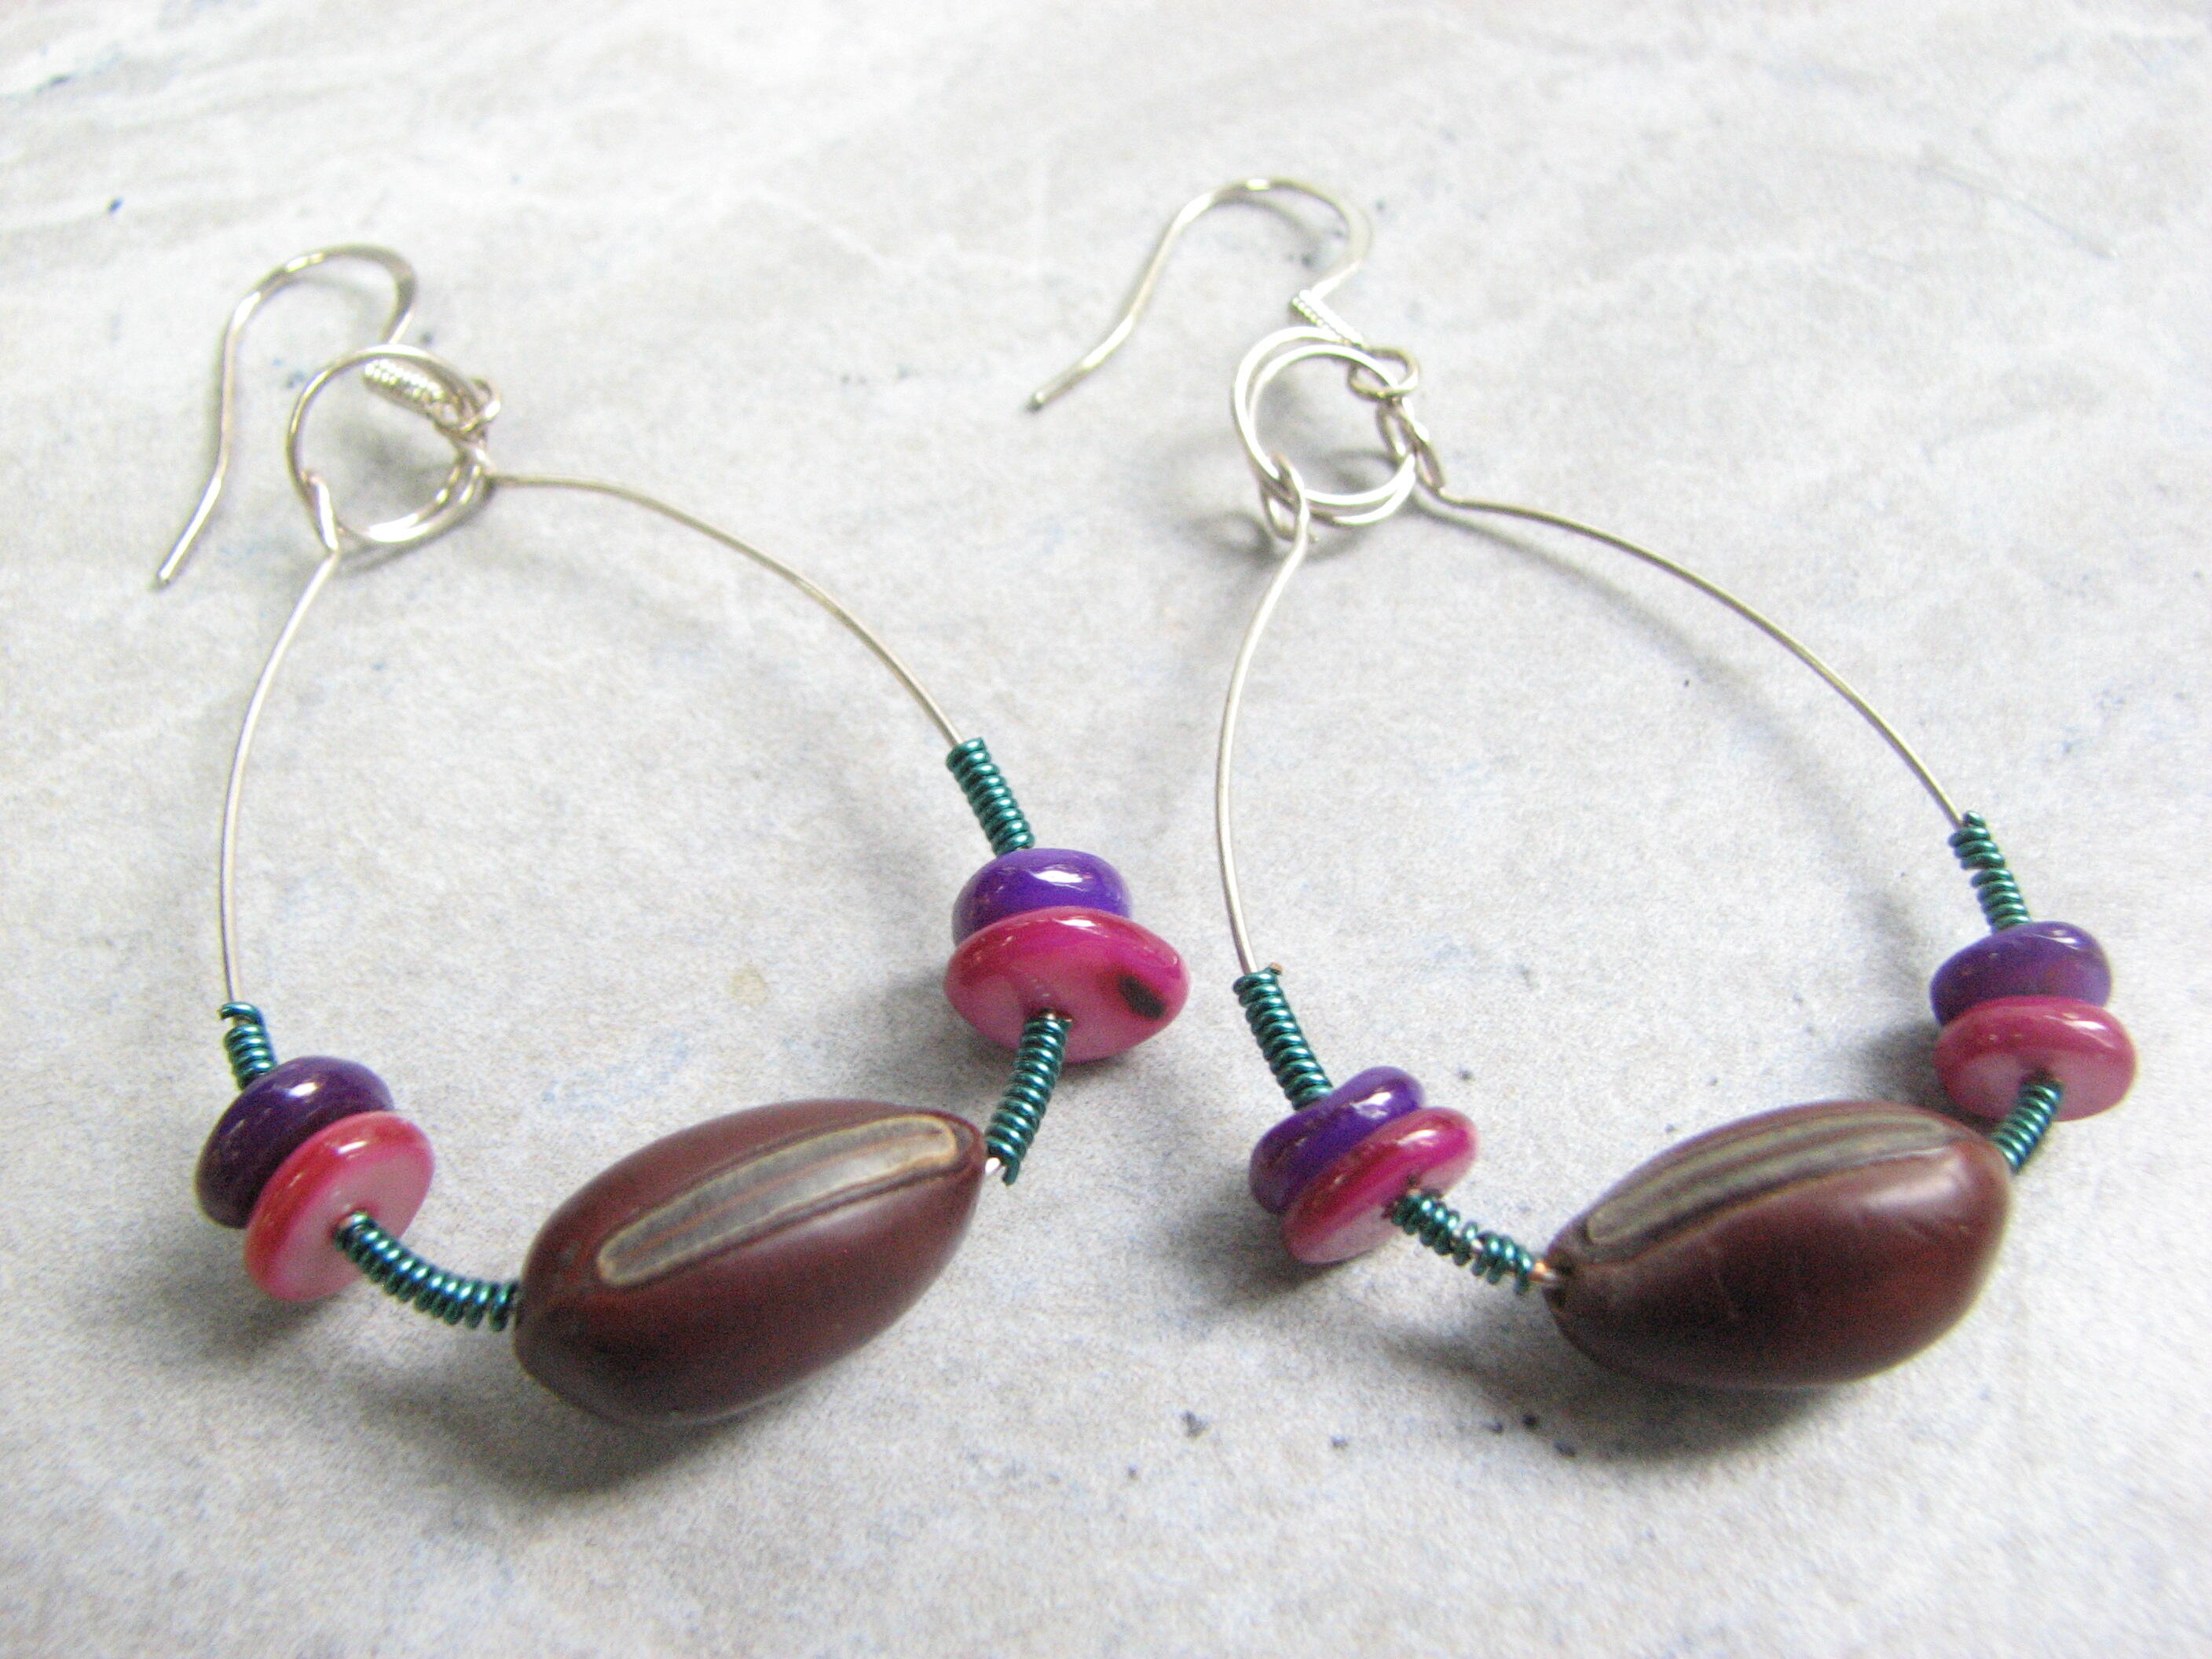 These little sea beans come from the Monkey Pod Tree made into a one of a kind pair of earrings straight from nature.